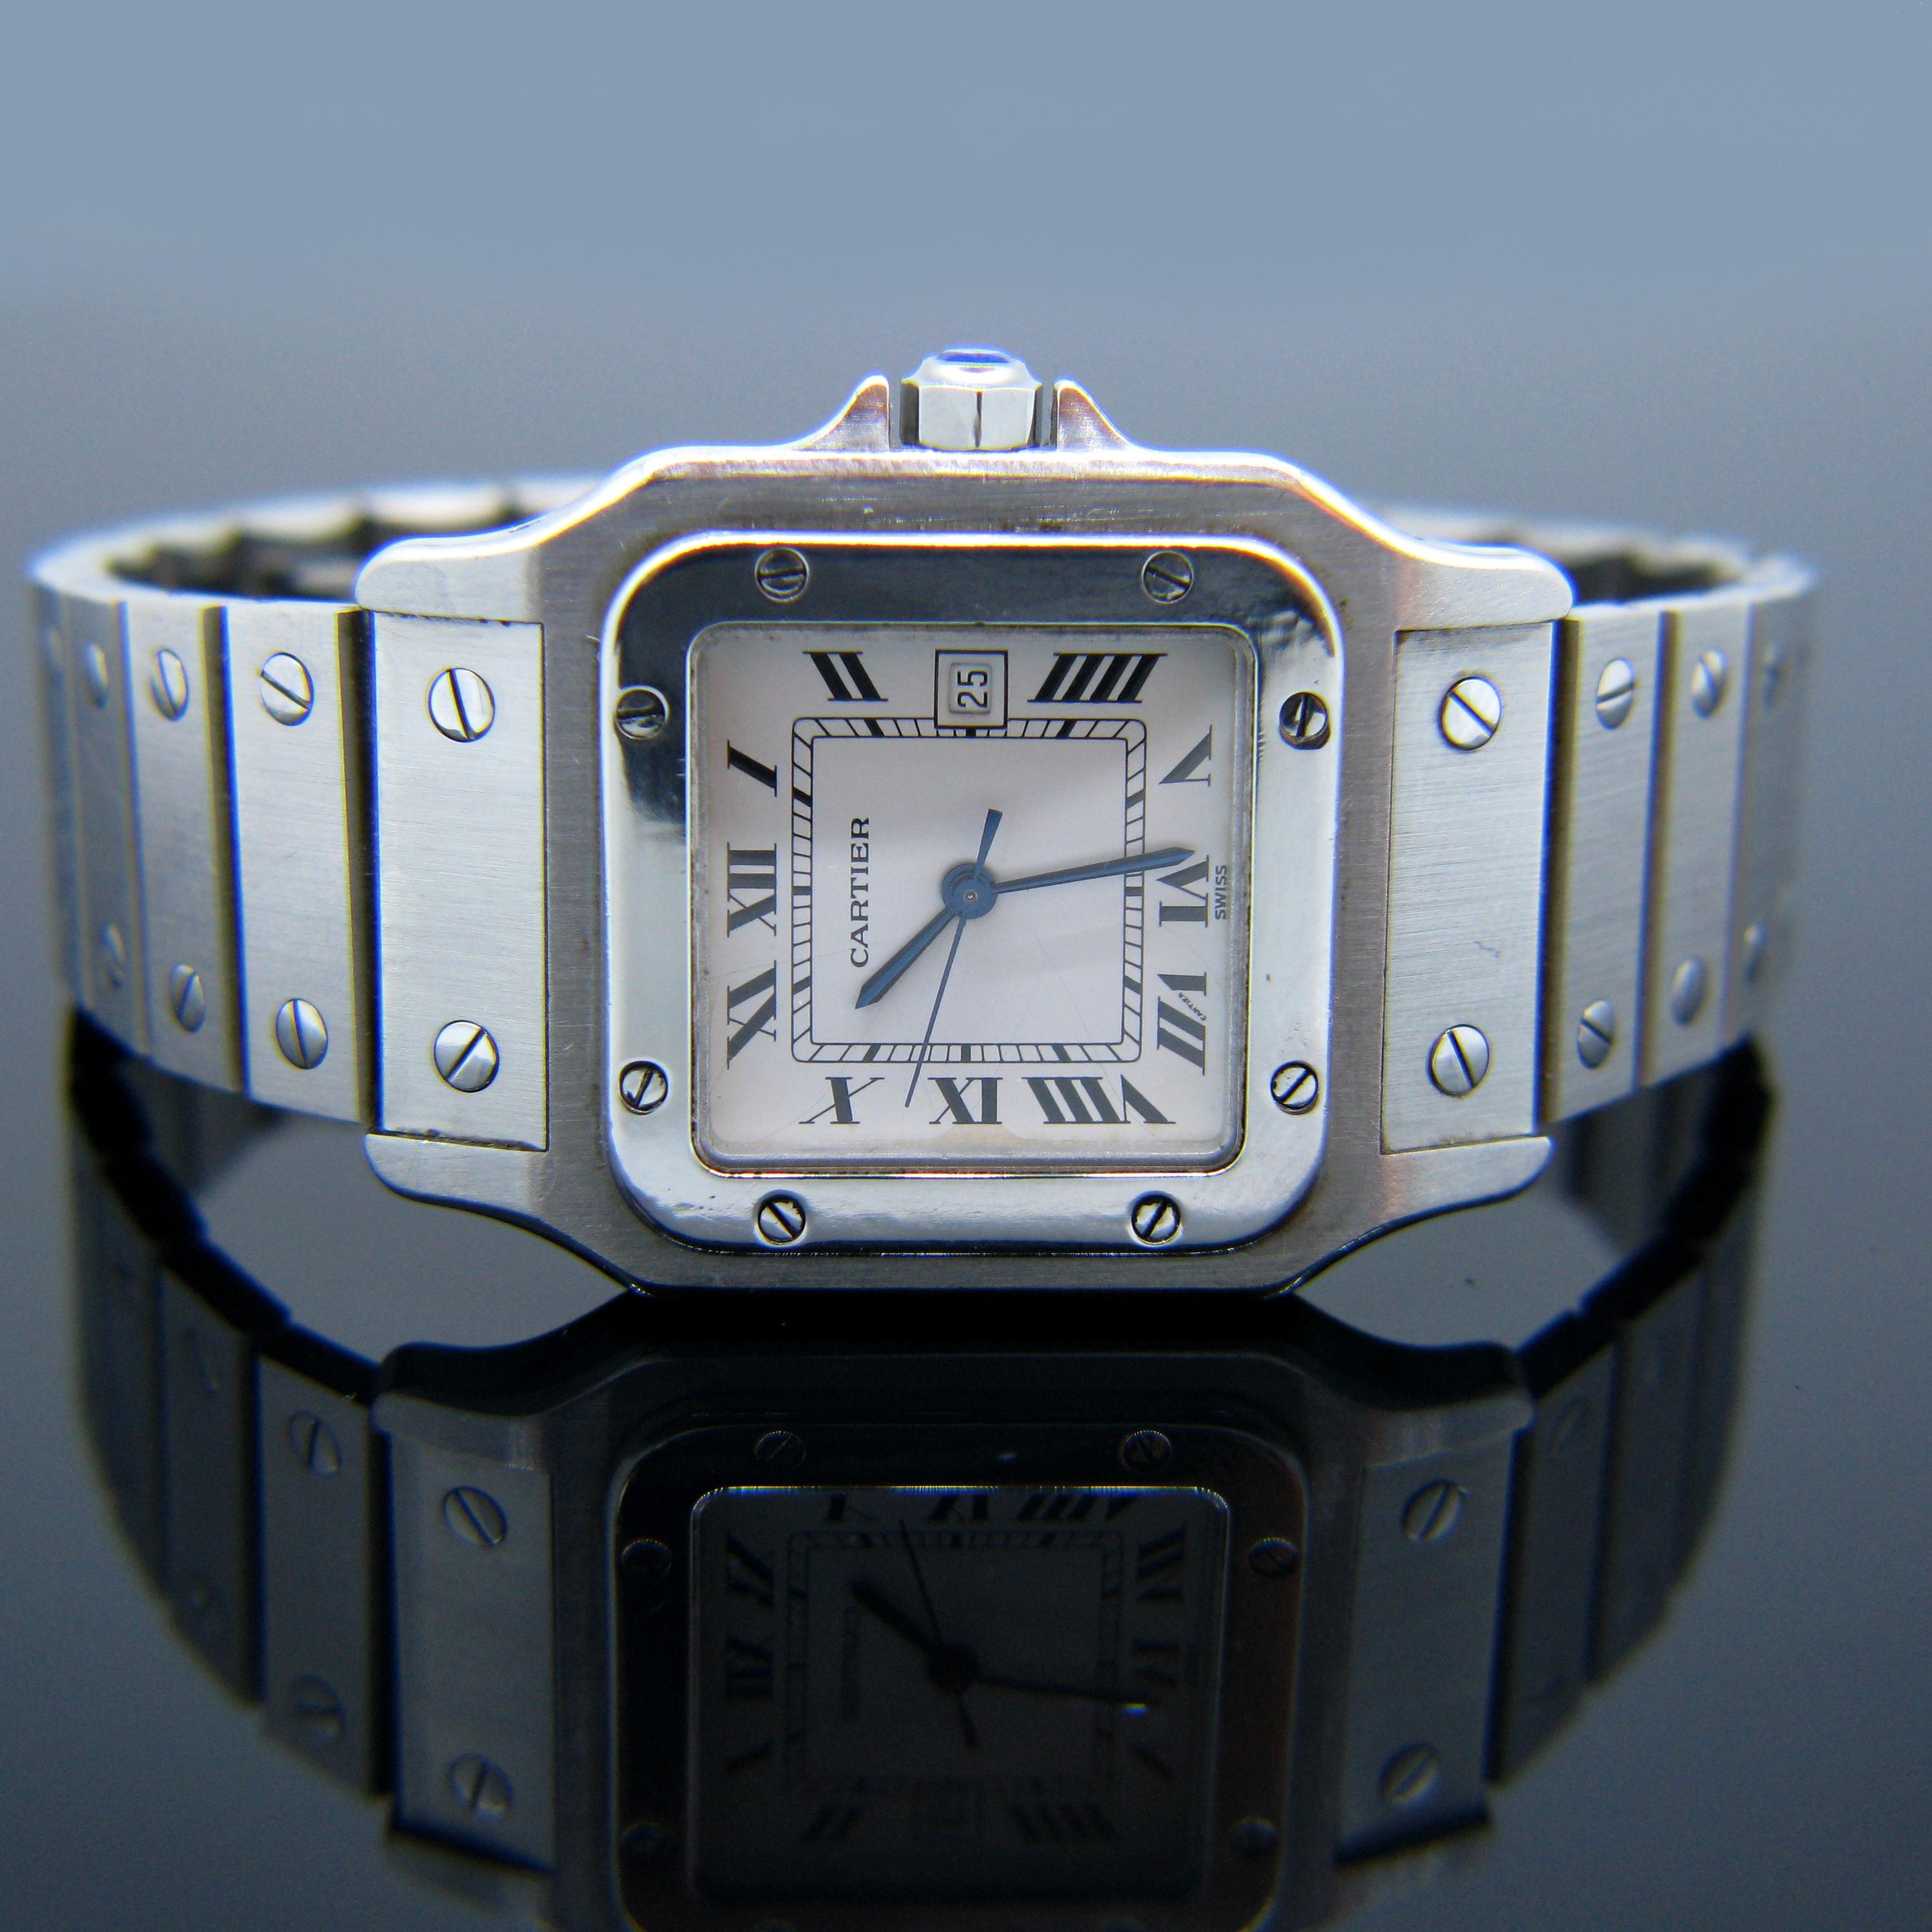 This Cartier watch is from the Santos collection - it is automatic and is made in stainless steel. It is the medium/standard size. The bracelet is made of flat links and the size can be adjusted by removing or adding links. It is in good condition